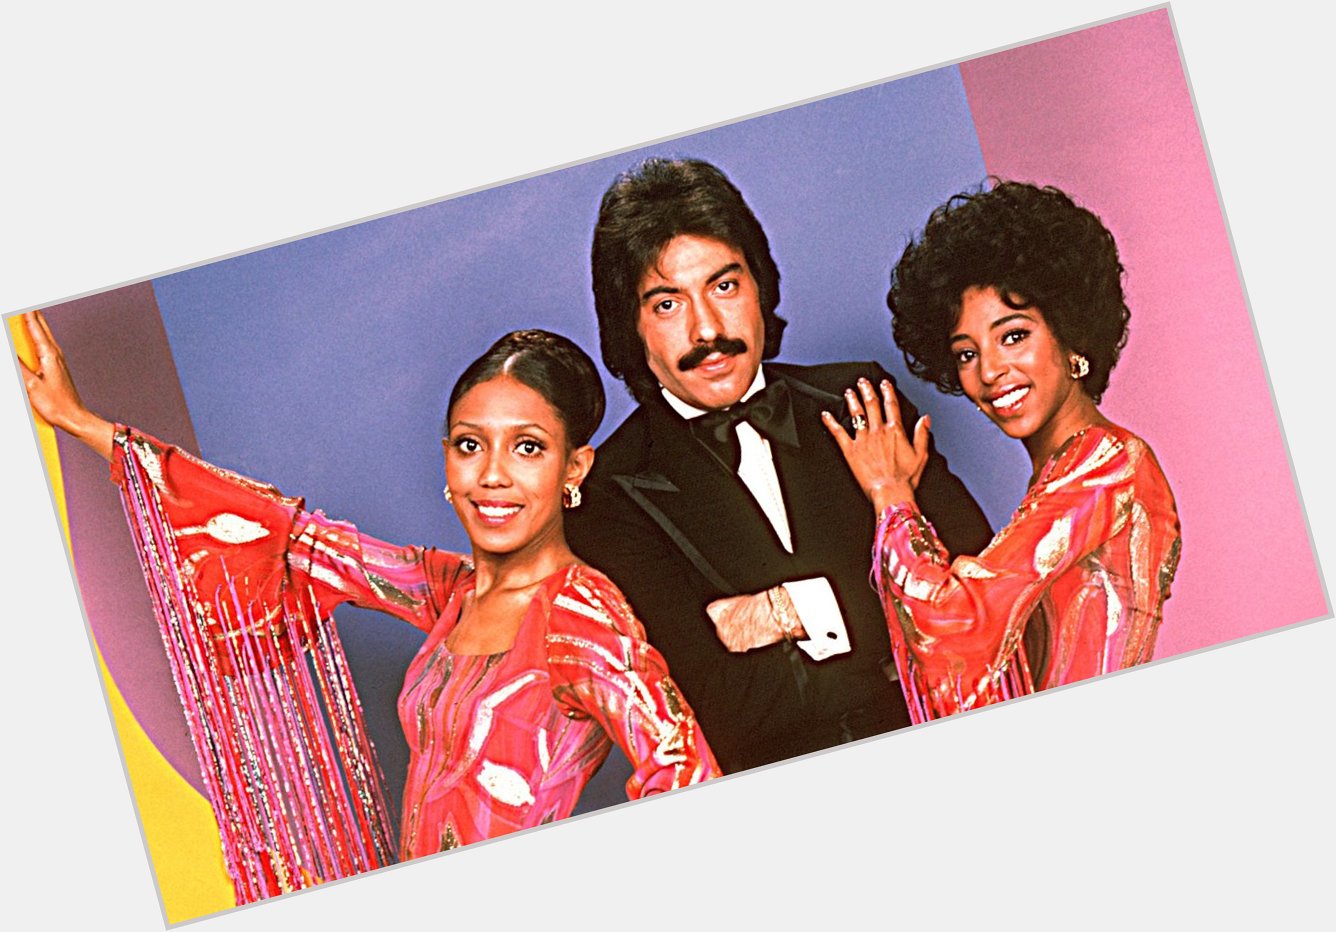 Please join me here at in wishing the one and only Tony Orlando a very Happy 77th Birthday today  